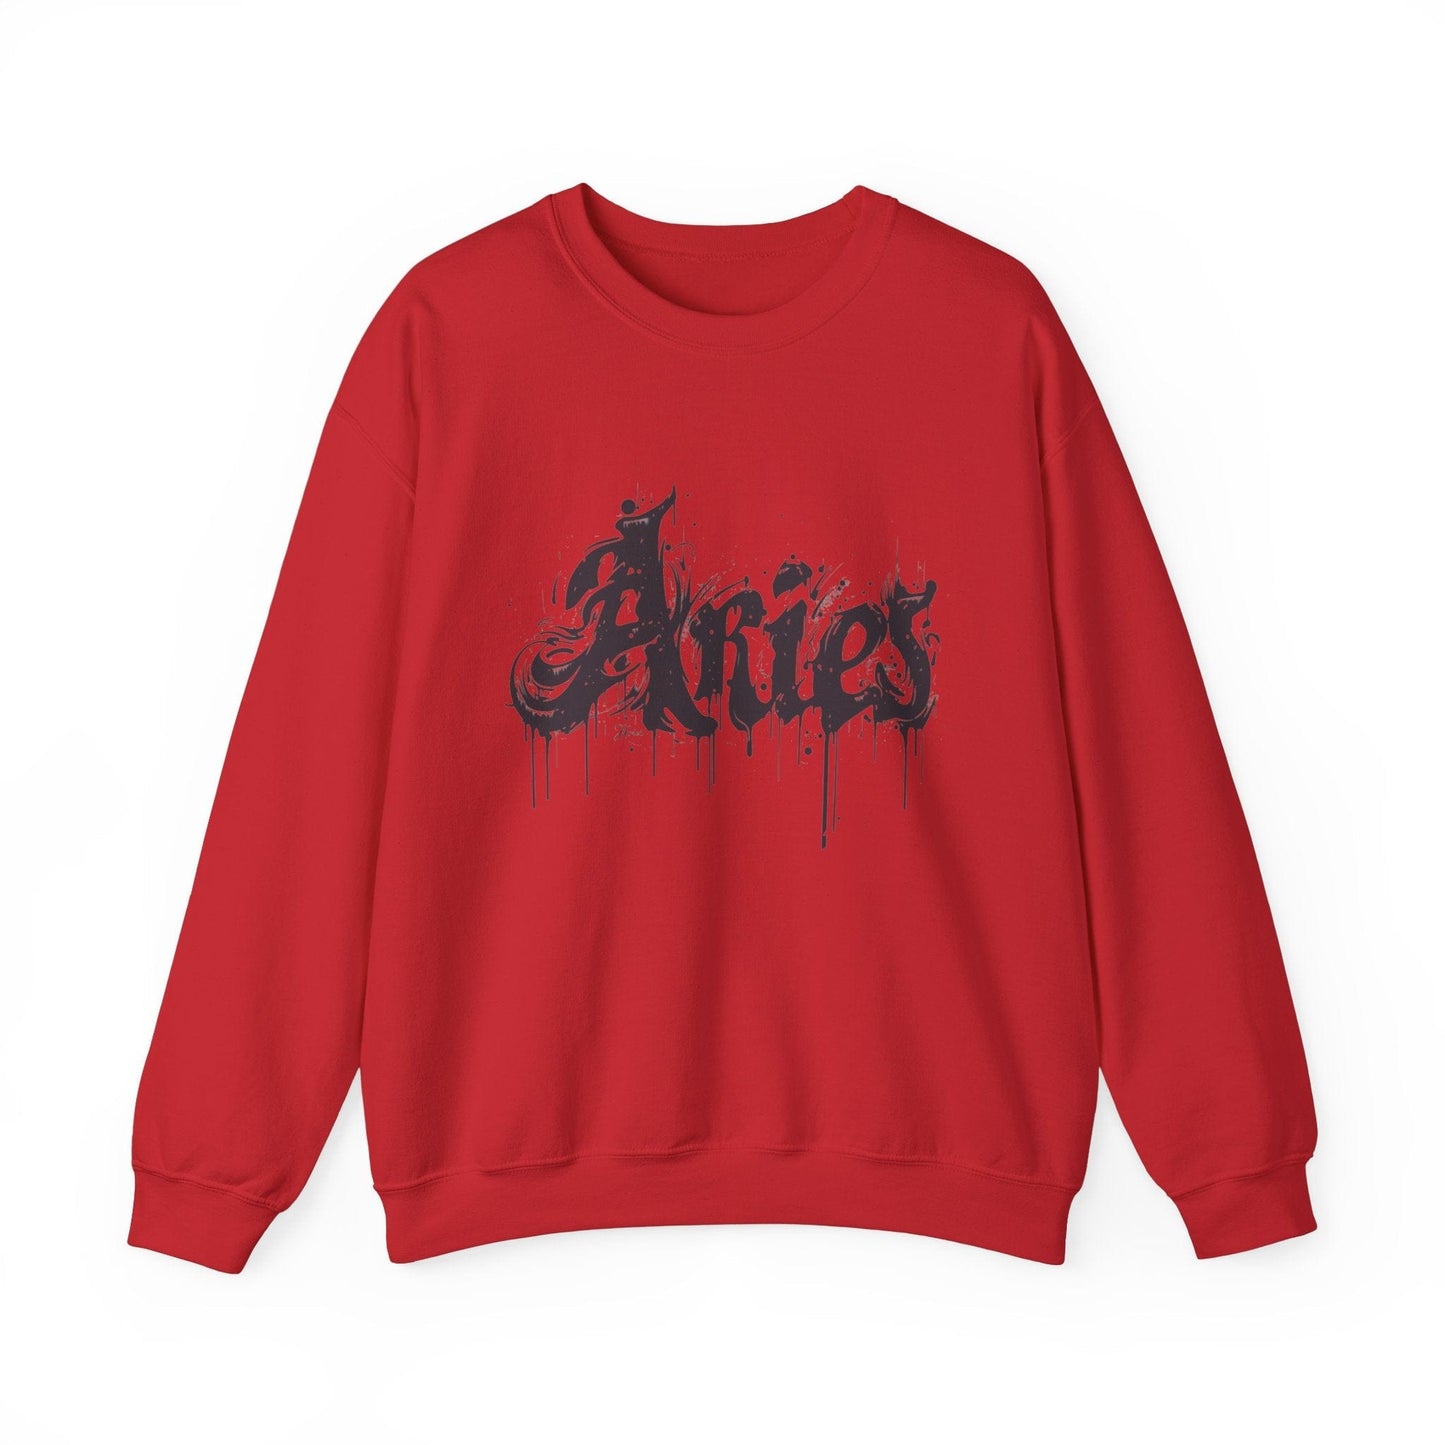 Sweatshirt S / Red Ink-Dripped Aries Energy Soft Sweater: Embrace Your Fire